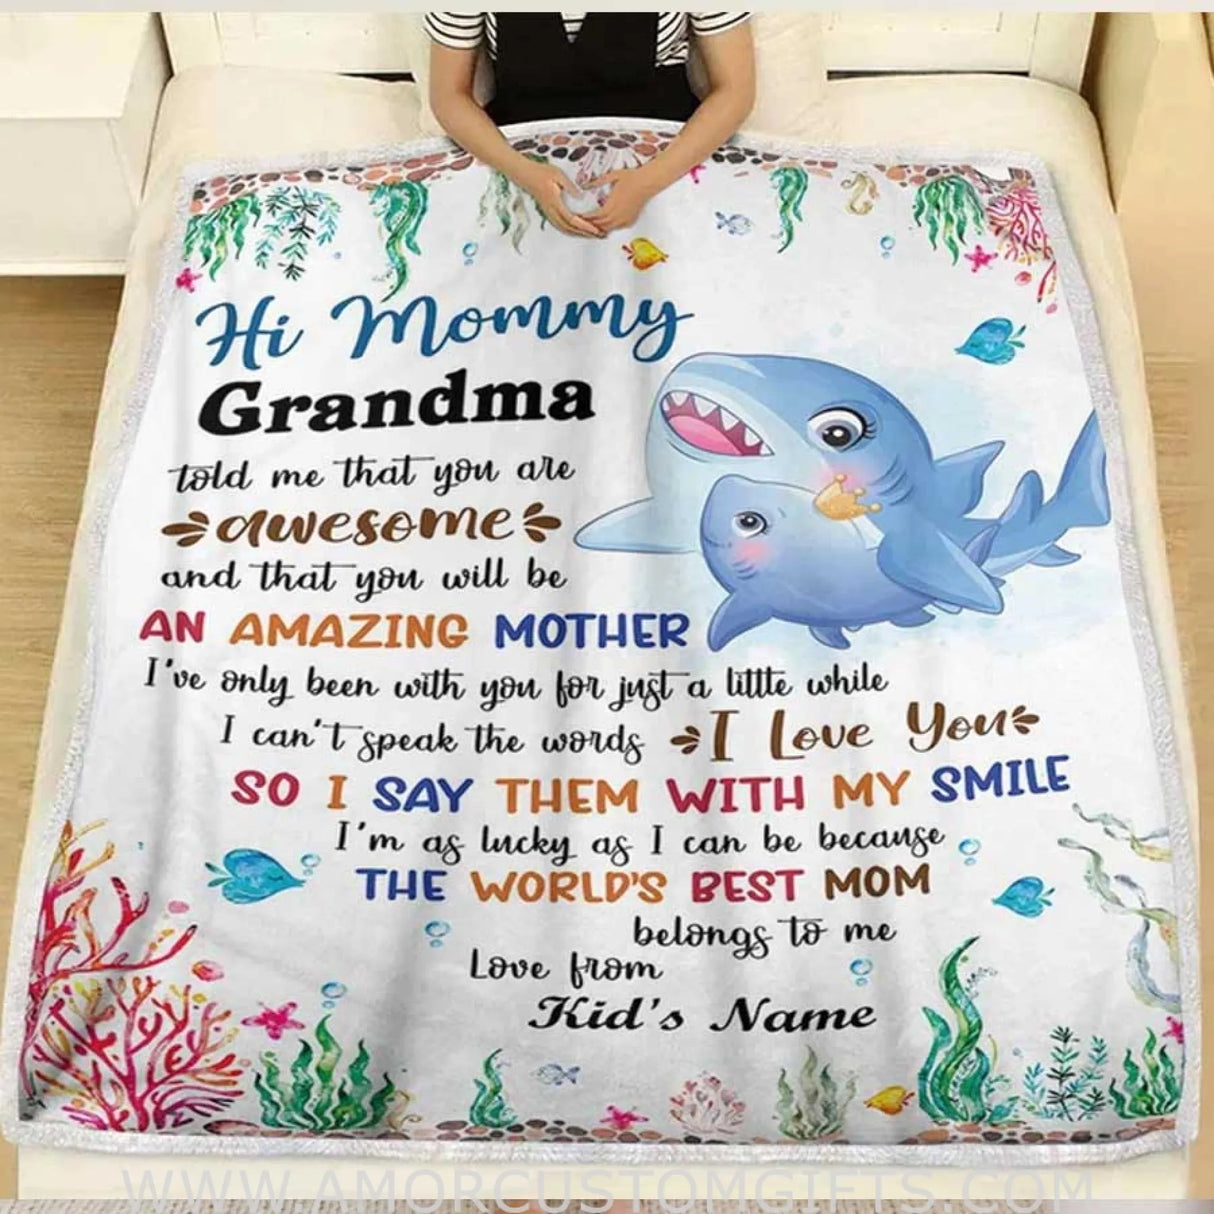 Blanket Personalized Blanket Blanket for new Mom, Personalized to My Mommy Fleece Blanket, First, Happy 1st First Time Mom Gift